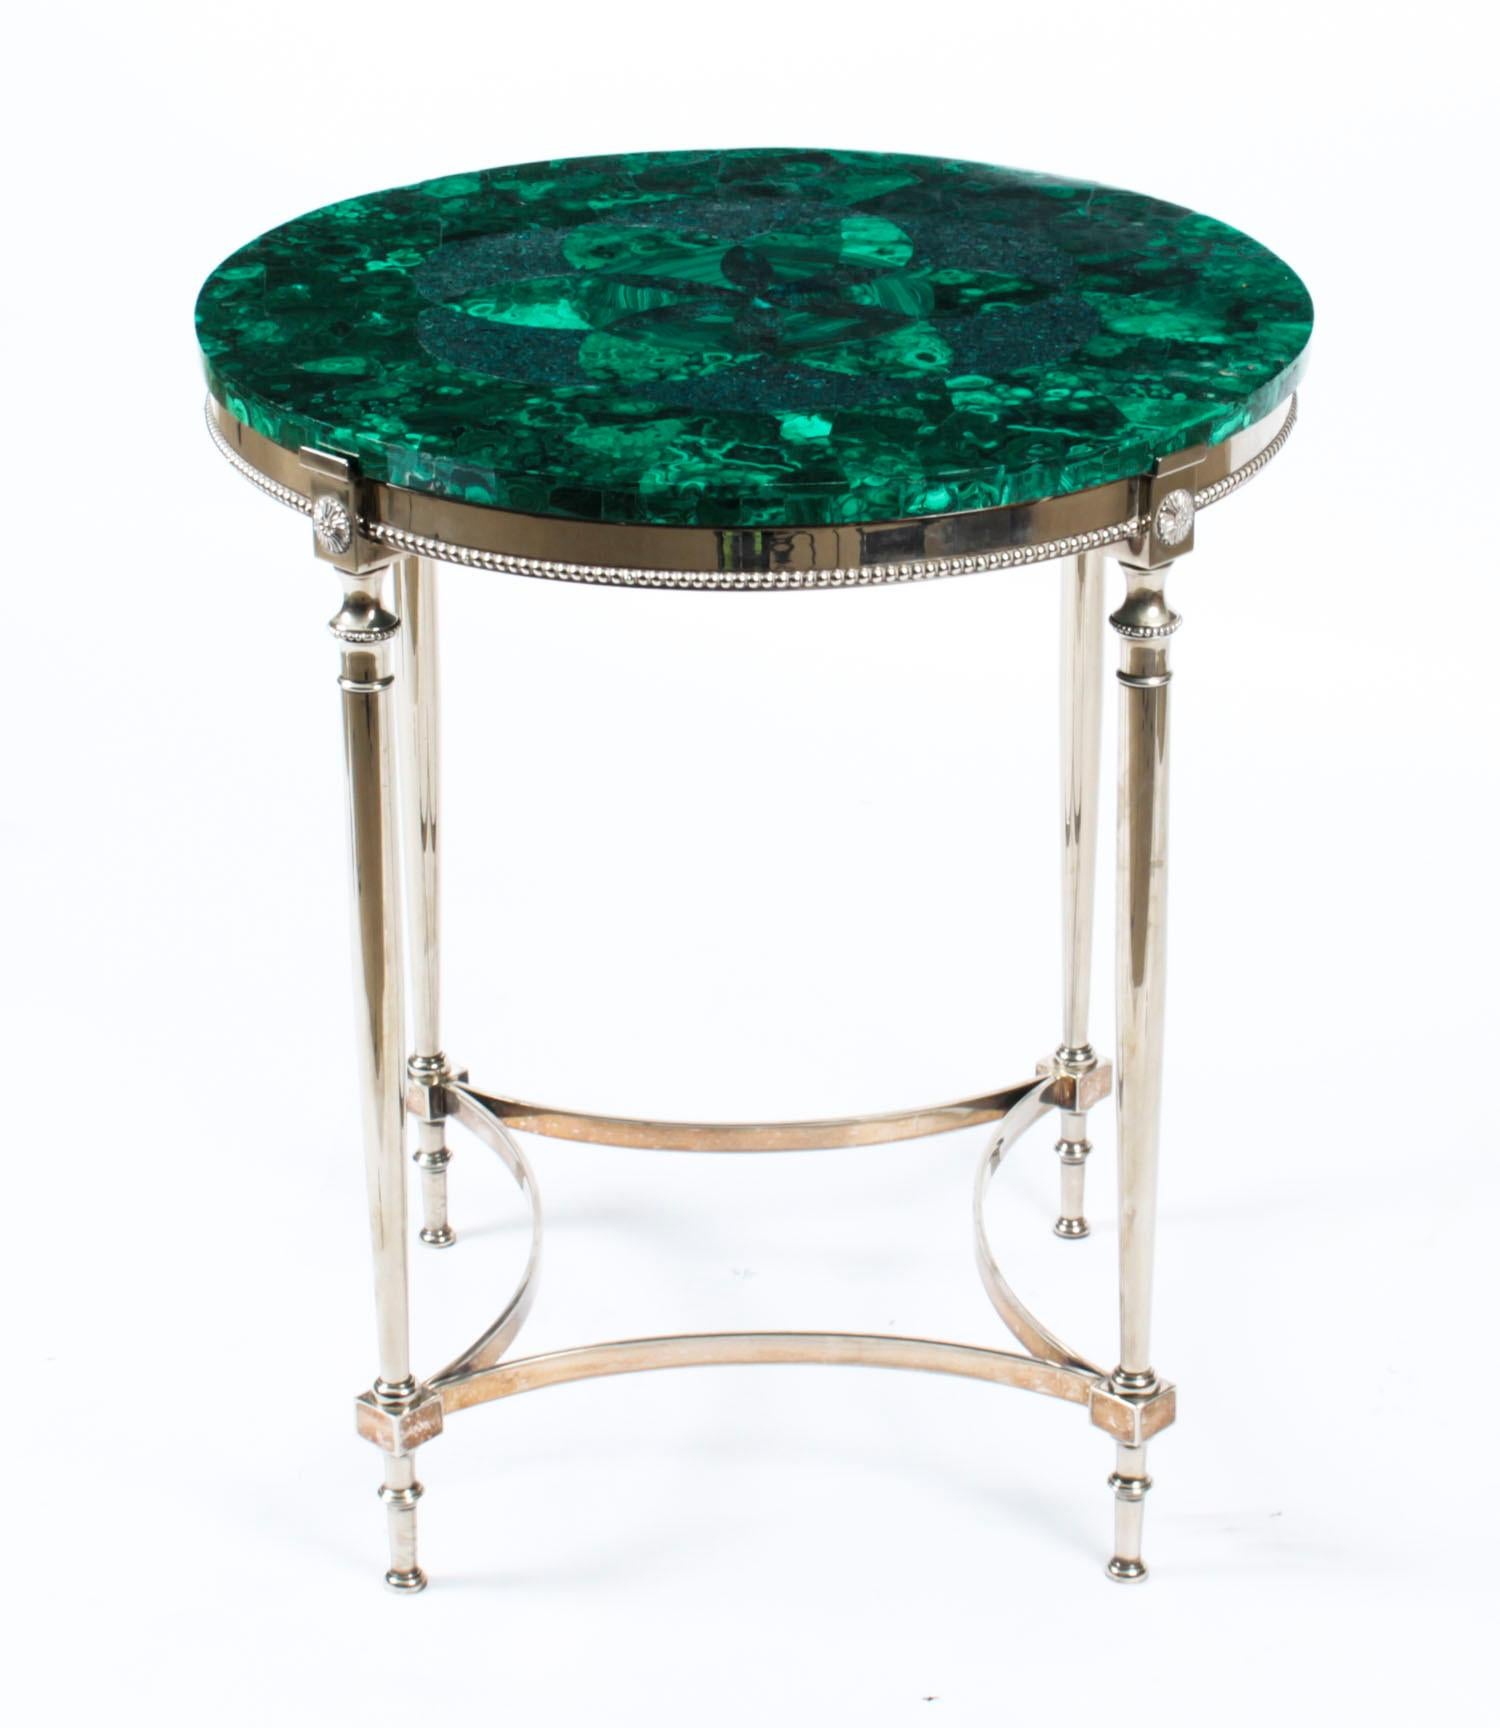 Antique French Art Deco malachite occasional table, circa 1920 in date.

The circular table features a decorative malachite top which sits on a beaded frieze with classical column legs joined by a shaped stretcher.
 
There is no mistaking the